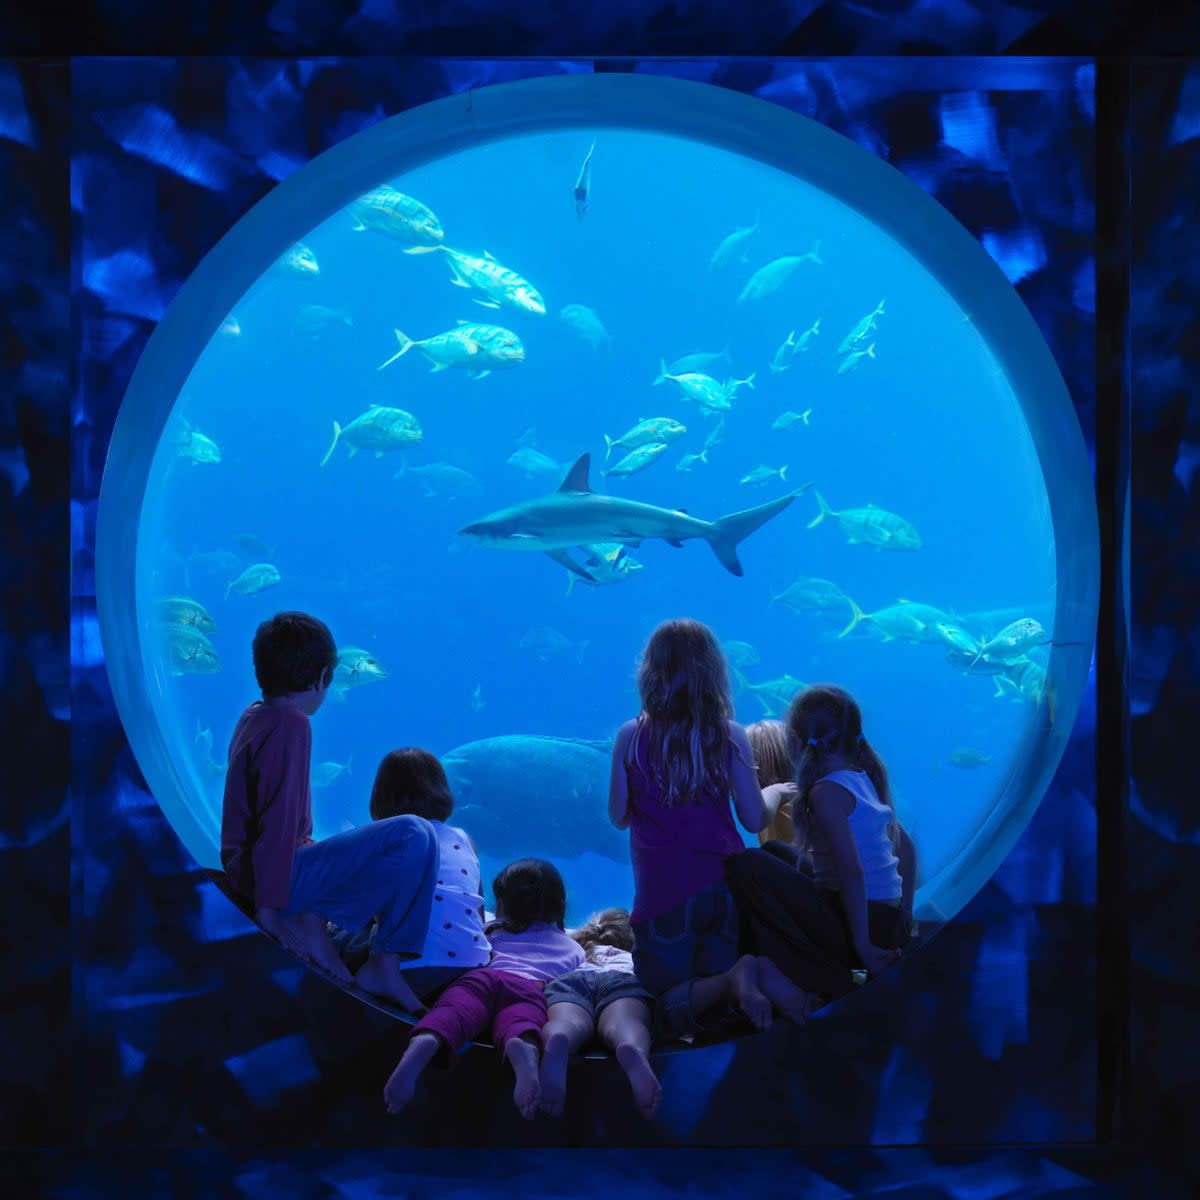 Kids will be in their element at the hotel’s giant indoor aquarium (Atlantis, The Palm)